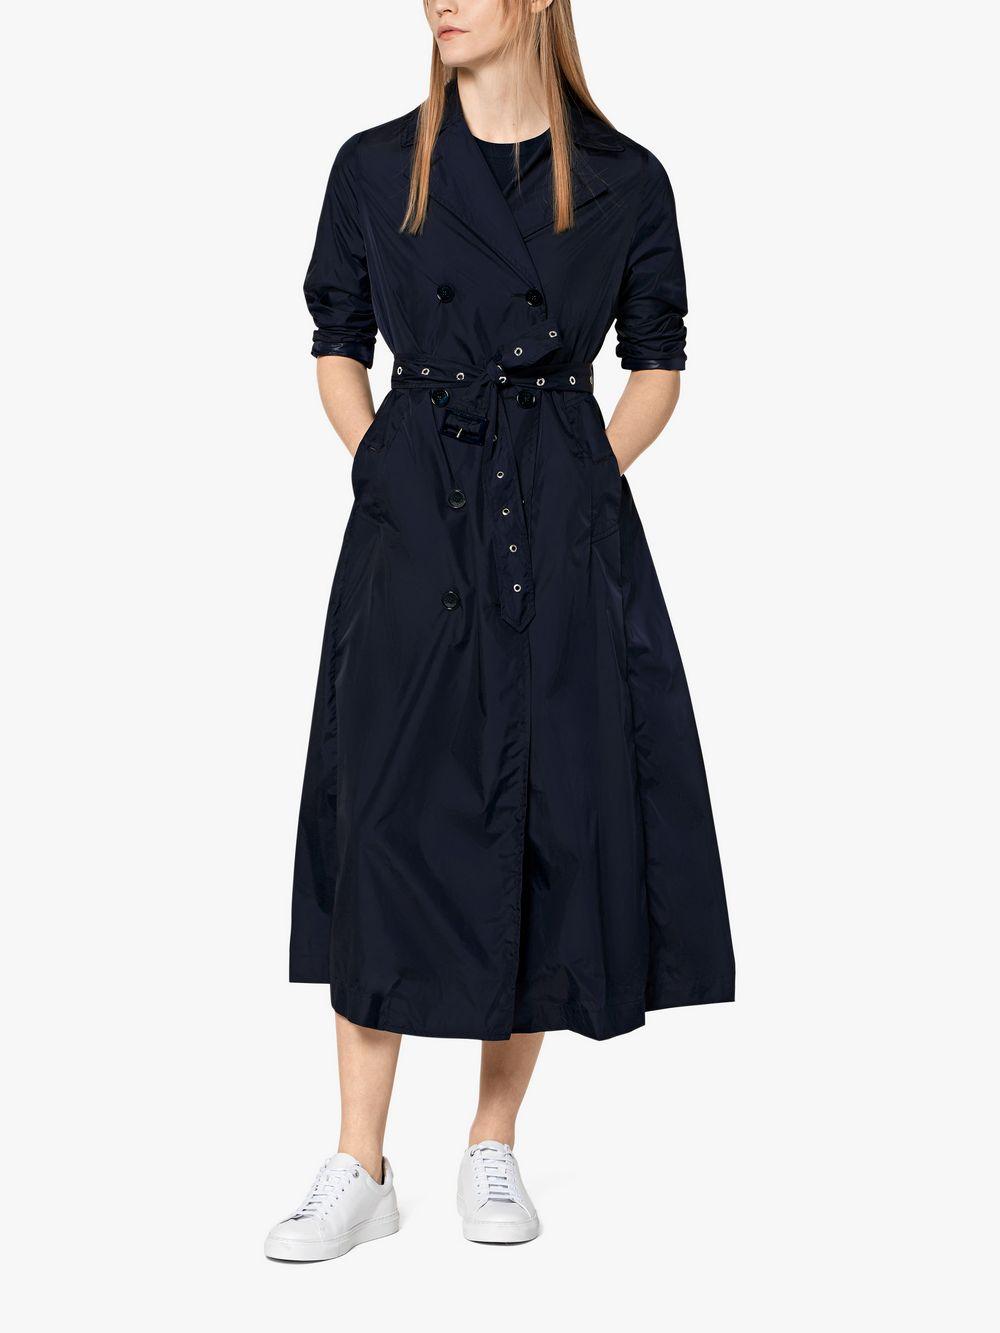 Mackintosh Synthetic Navy Nylon Long Trench Coat Lm-091b in Blue - Lyst